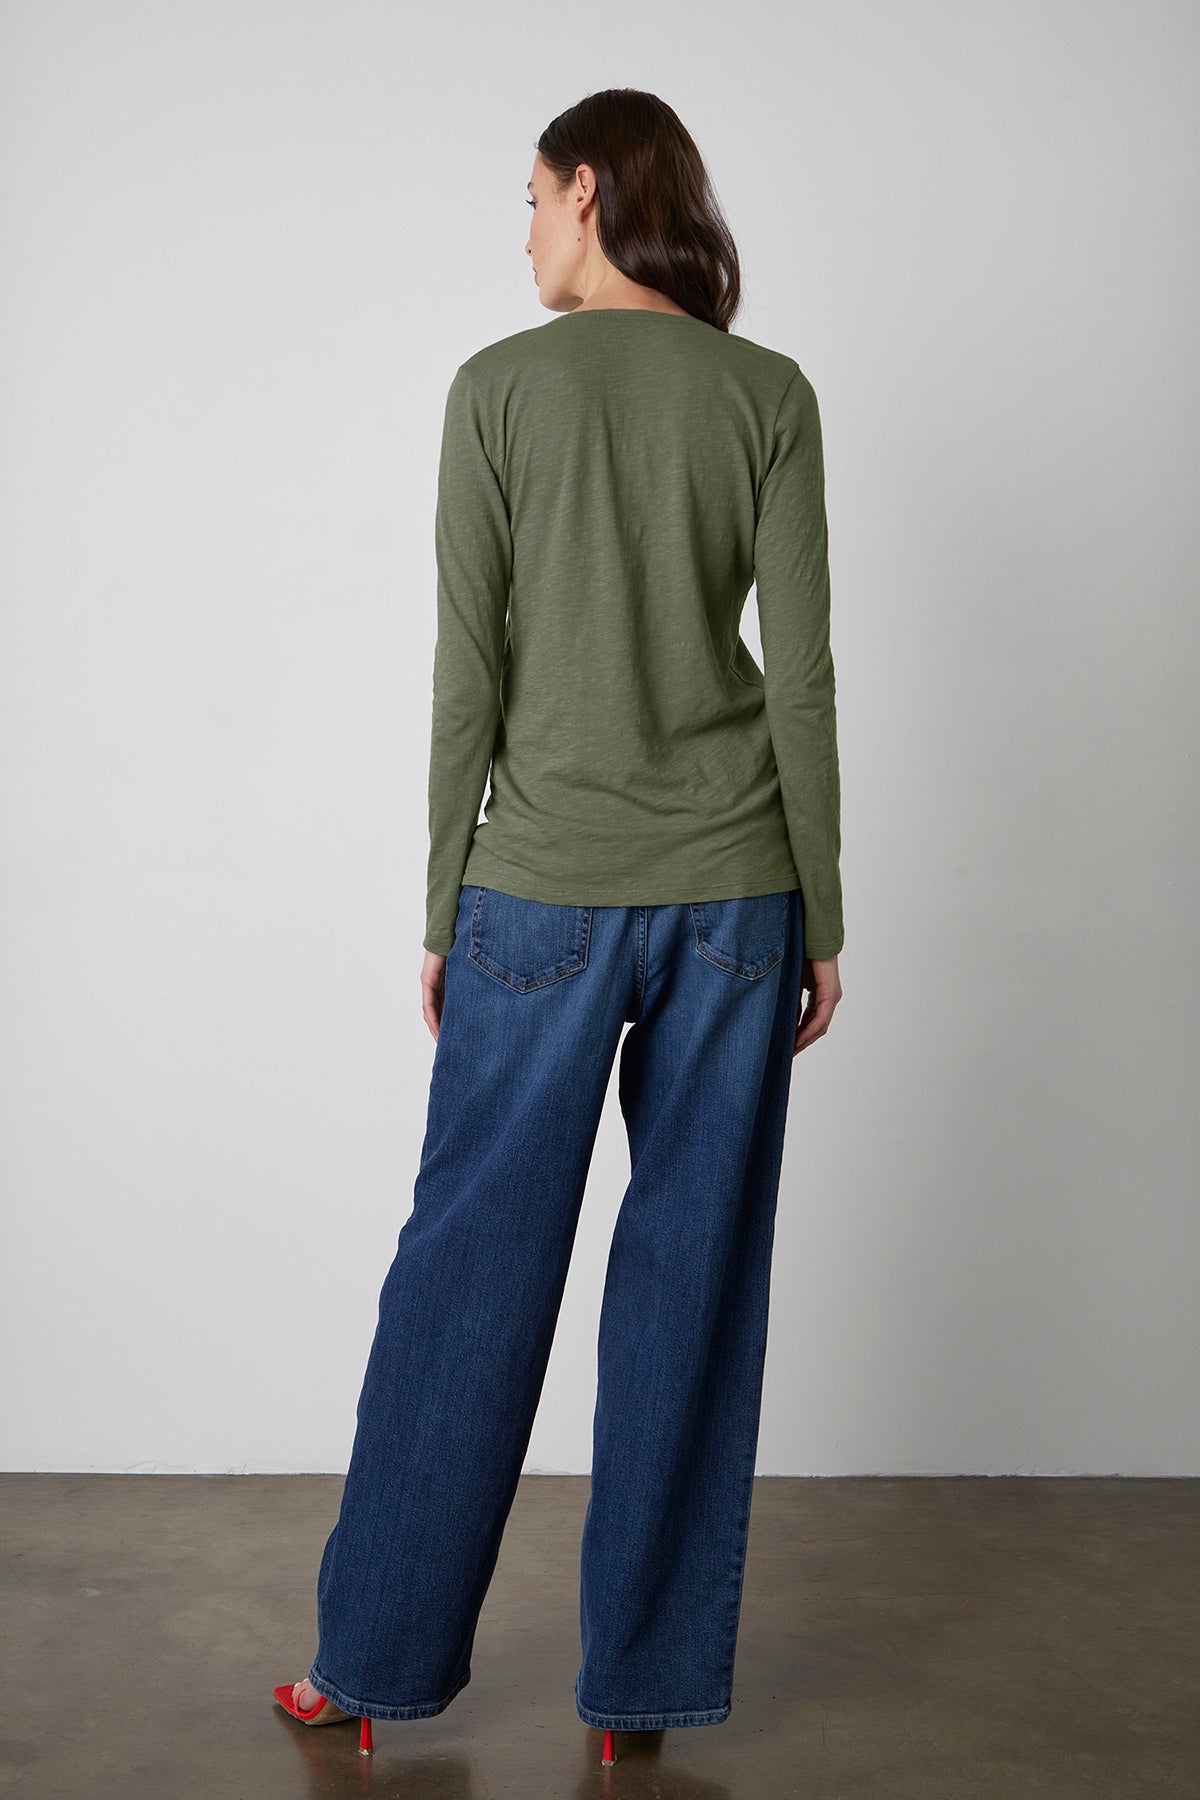   Blaire Tee Olive Back 